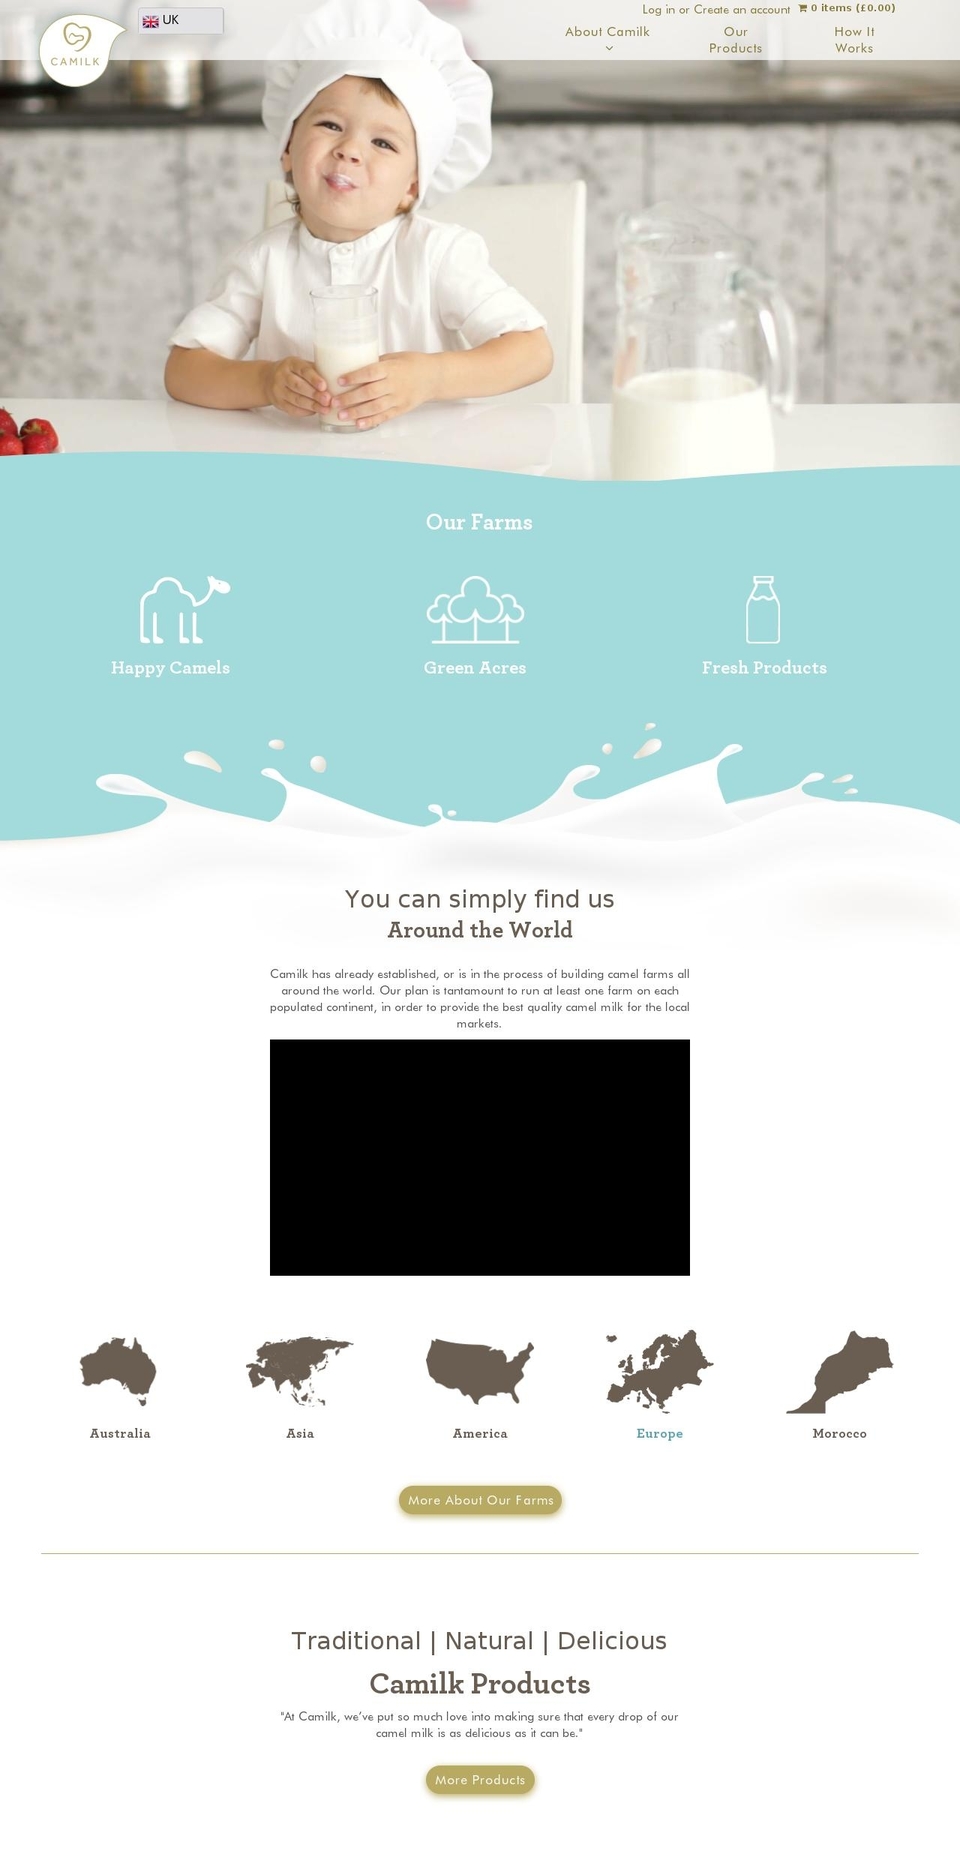 archive Shopify theme site example camilkdairy.co.uk